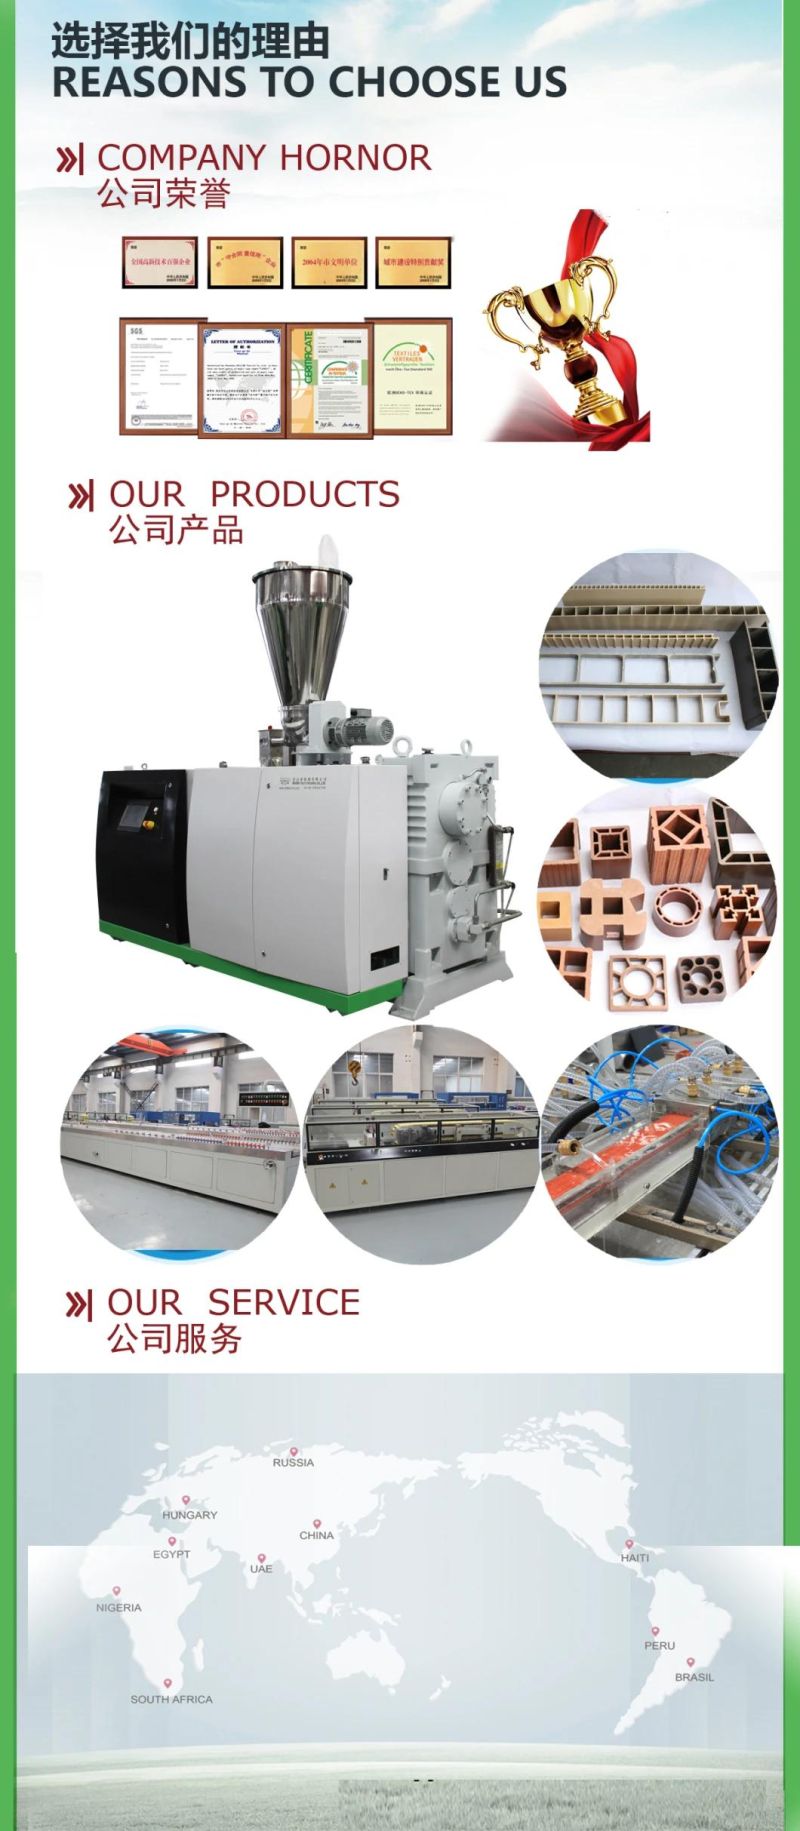 (Midtech Industry) Plastic Foaming PE/HDPE Ocean Marine Pedal Profile Board Extrusion Production Line